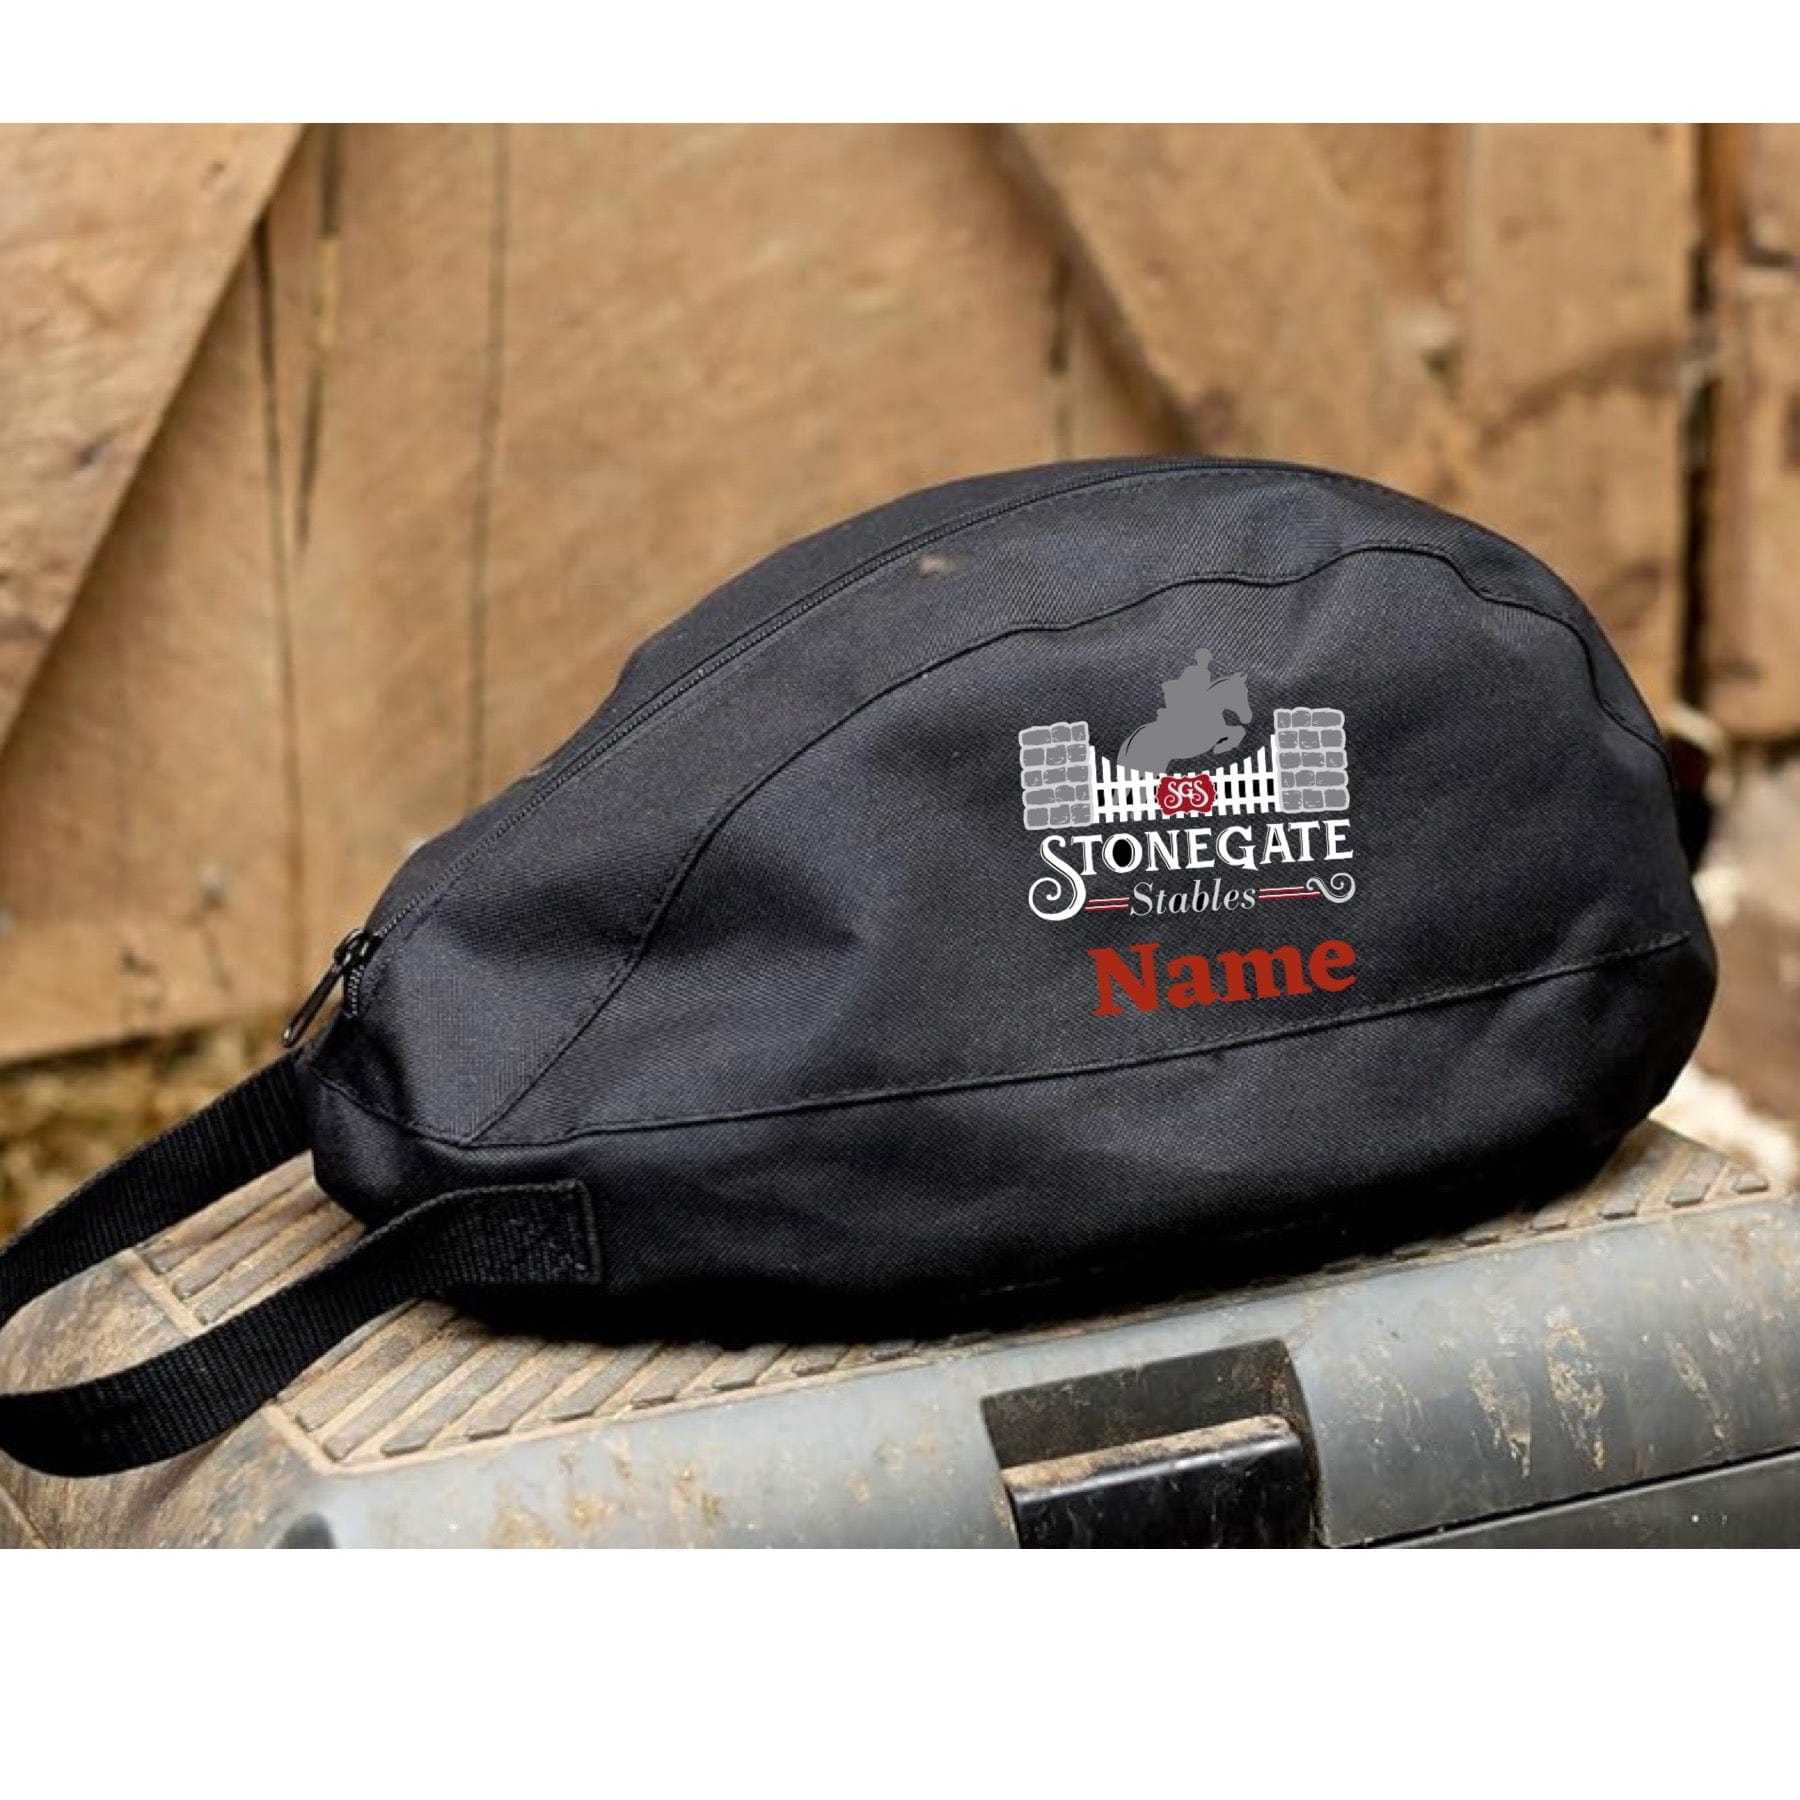 Equestrian Team Apparel Stonegate Stables Helmet Bag equestrian team apparel online tack store mobile tack store custom farm apparel custom show stable clothing equestrian lifestyle horse show clothing riding clothes horses equestrian tack store